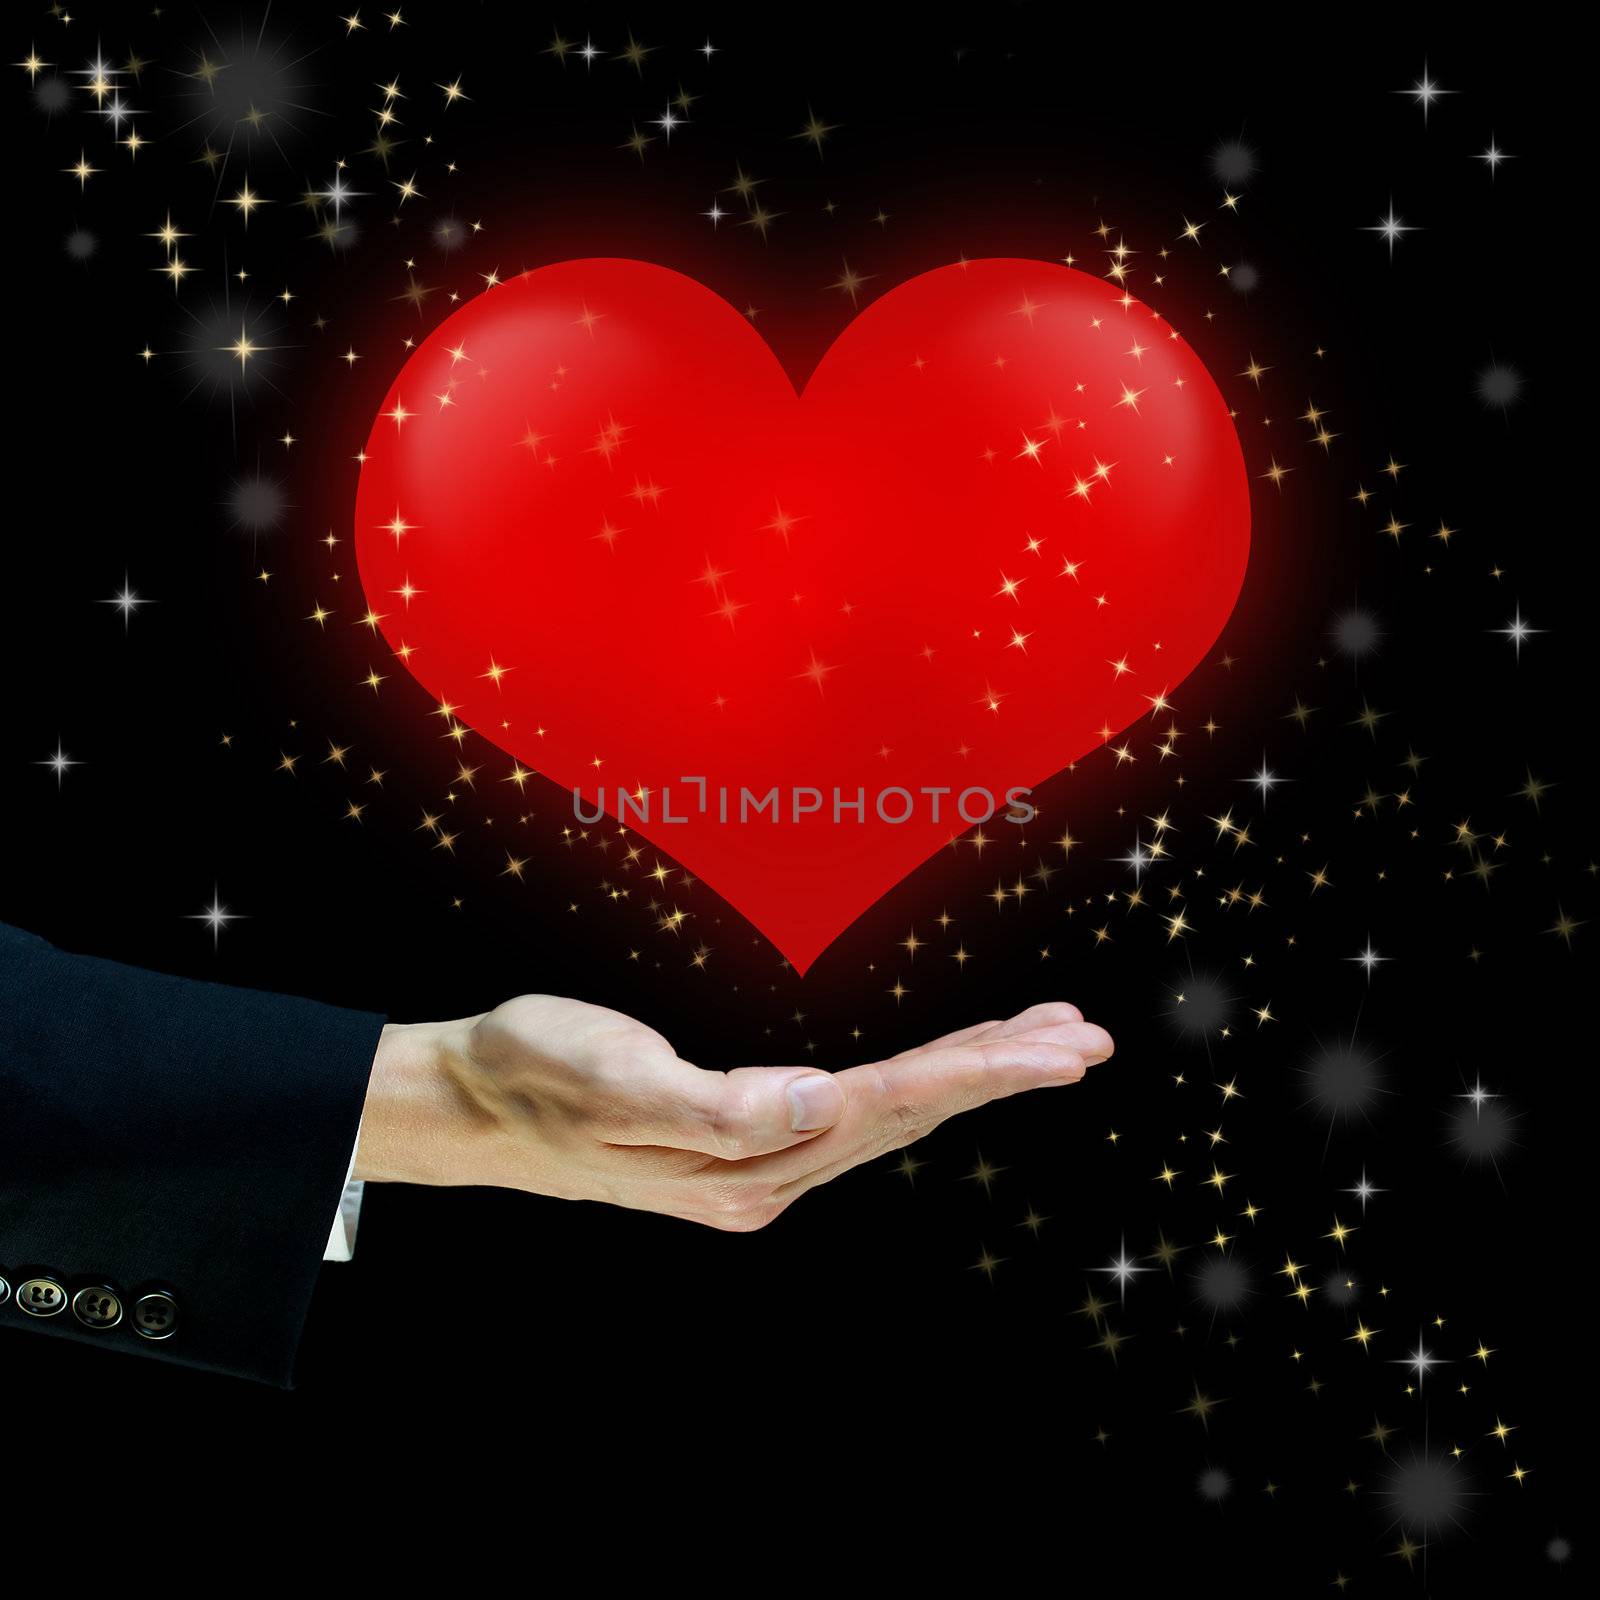 Red heart floating over a hand by melpomene